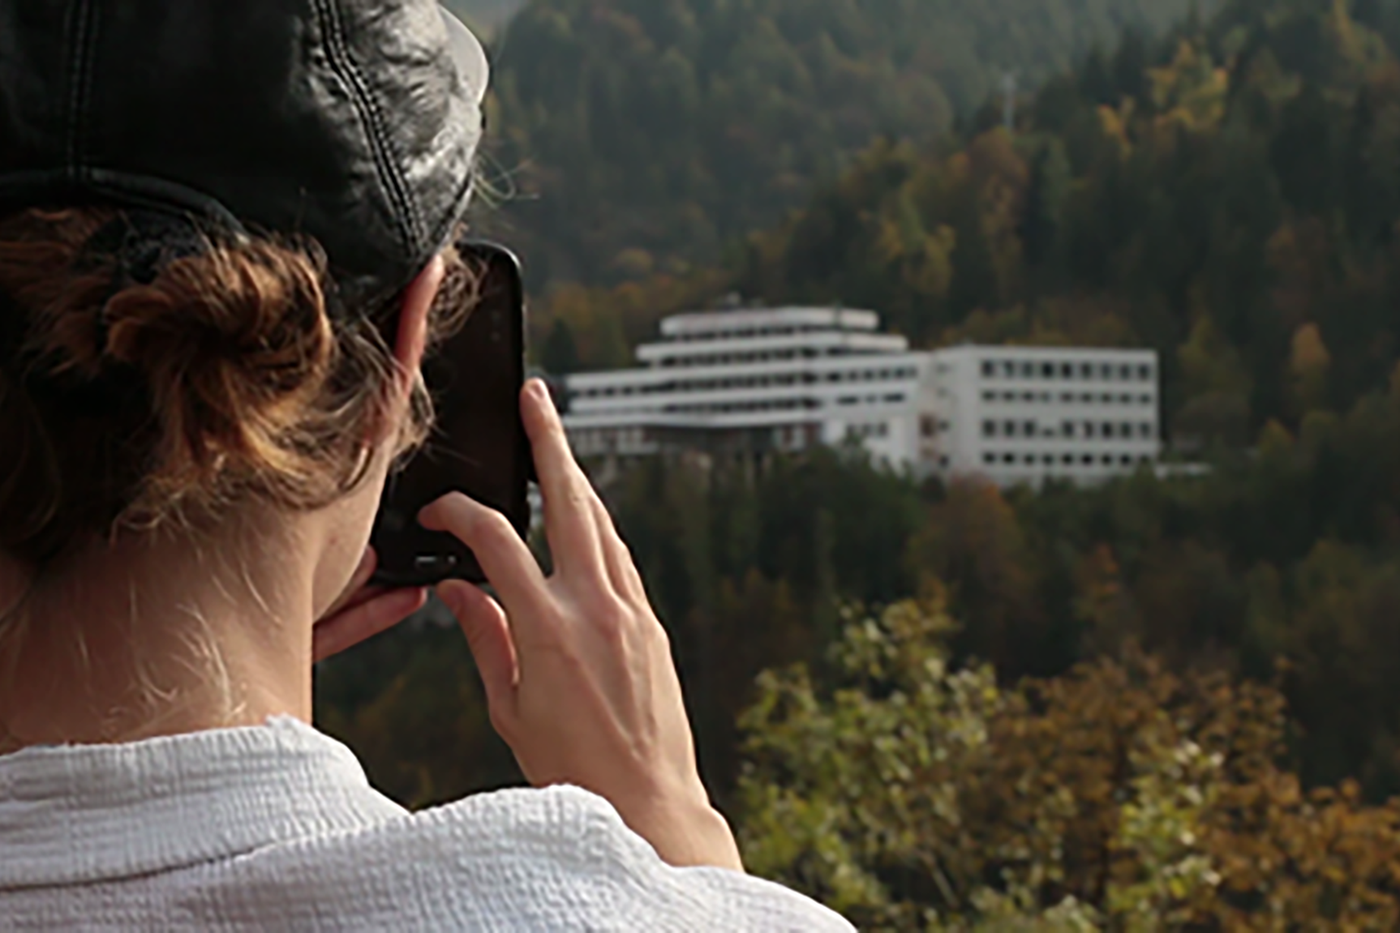 Video still. In the foreground on the left, you can see the back of a person's head taking a picture with a black phone of the background, where a large white house with many windows can be seen in a hilly forest.